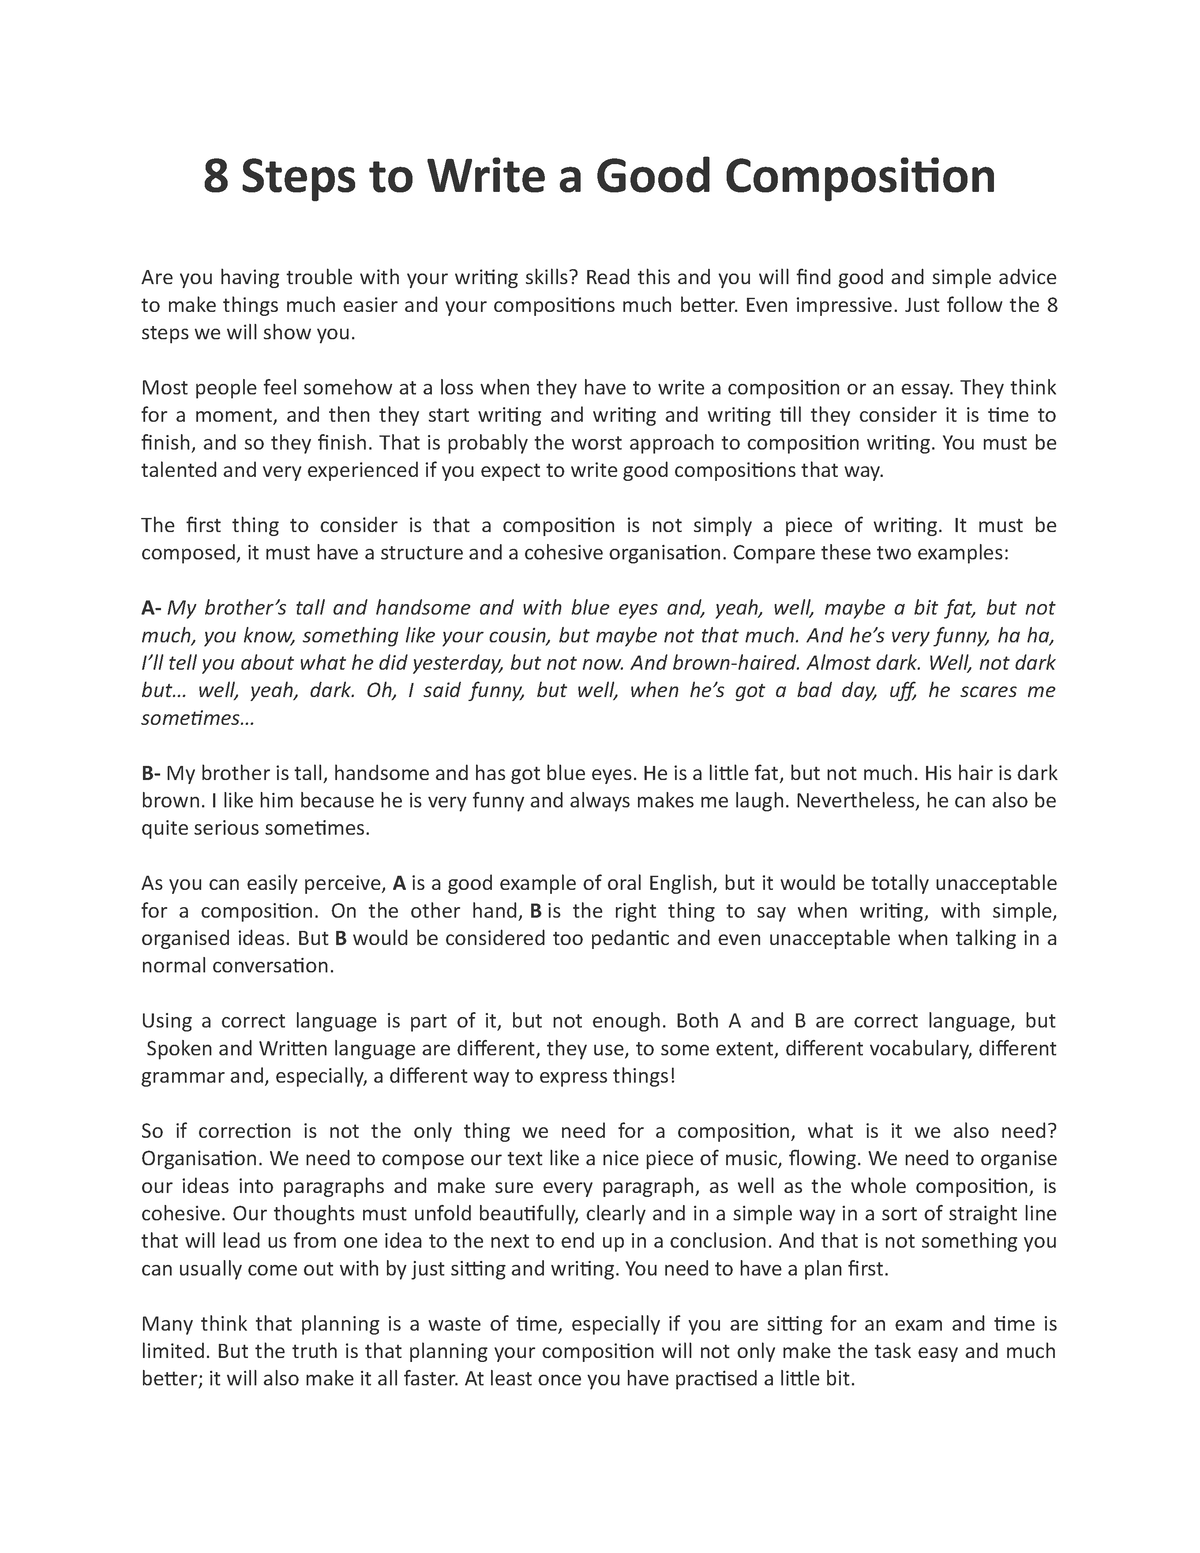 how to write a good composition about myself